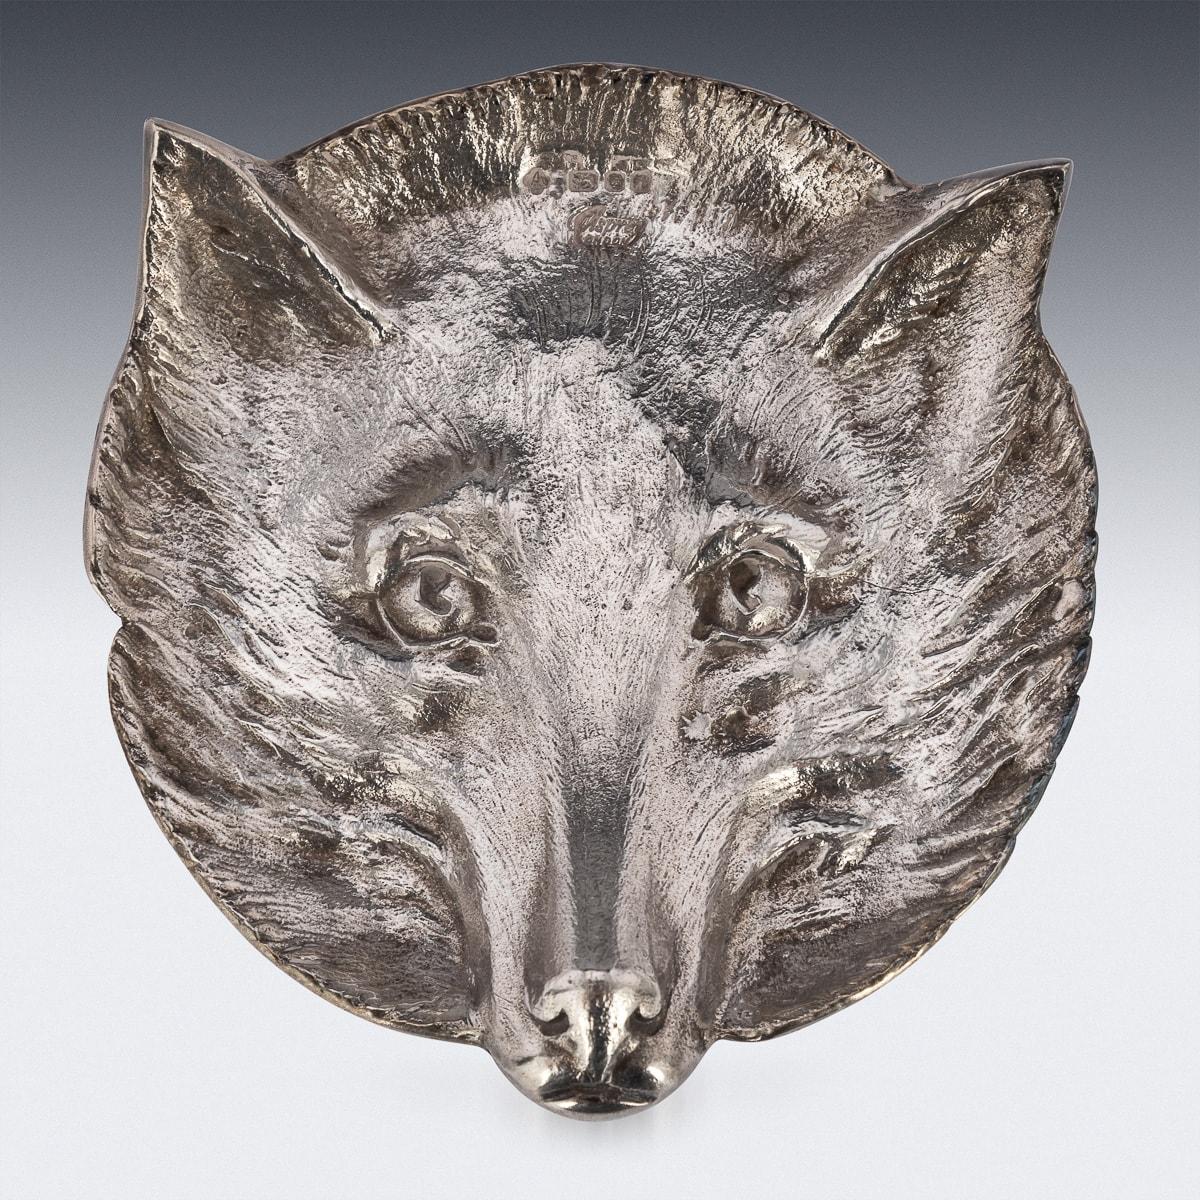 Novelty set of four solid silver fox head dishes, realistically cast as a fox heads with ears pricked and chased fur. Hallmarked English silver (925 standard), London, year 1982 (H), Maker A&CO (Asprey & Co)

CONDITION
In Great Condition - No